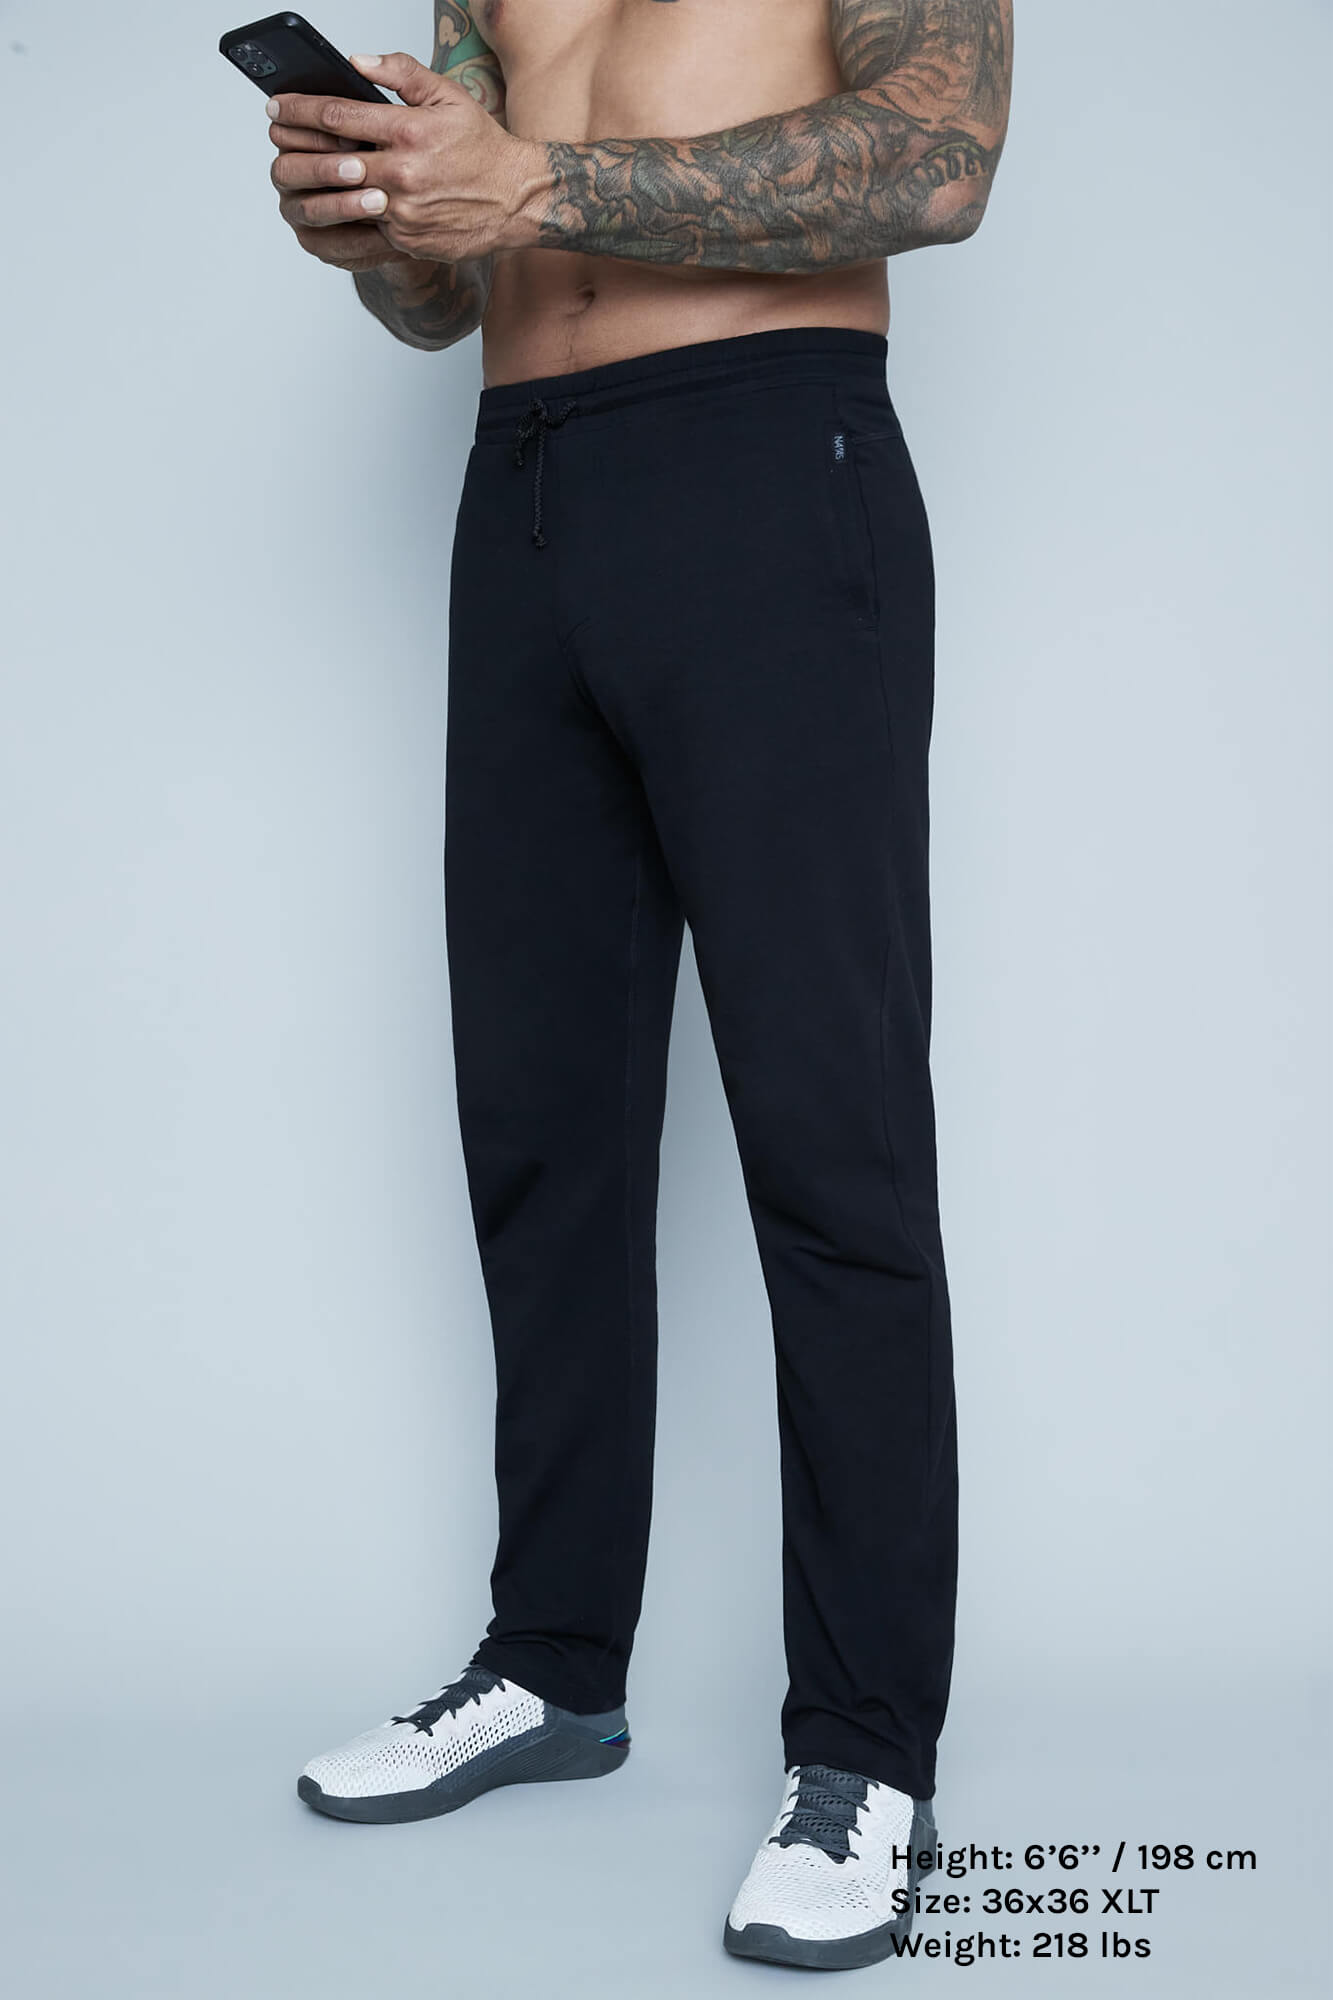 Tall pants for tall guys in black by Navas Lab. The perfect tall sweatpants for tall and slim guys looking for style and comfort.